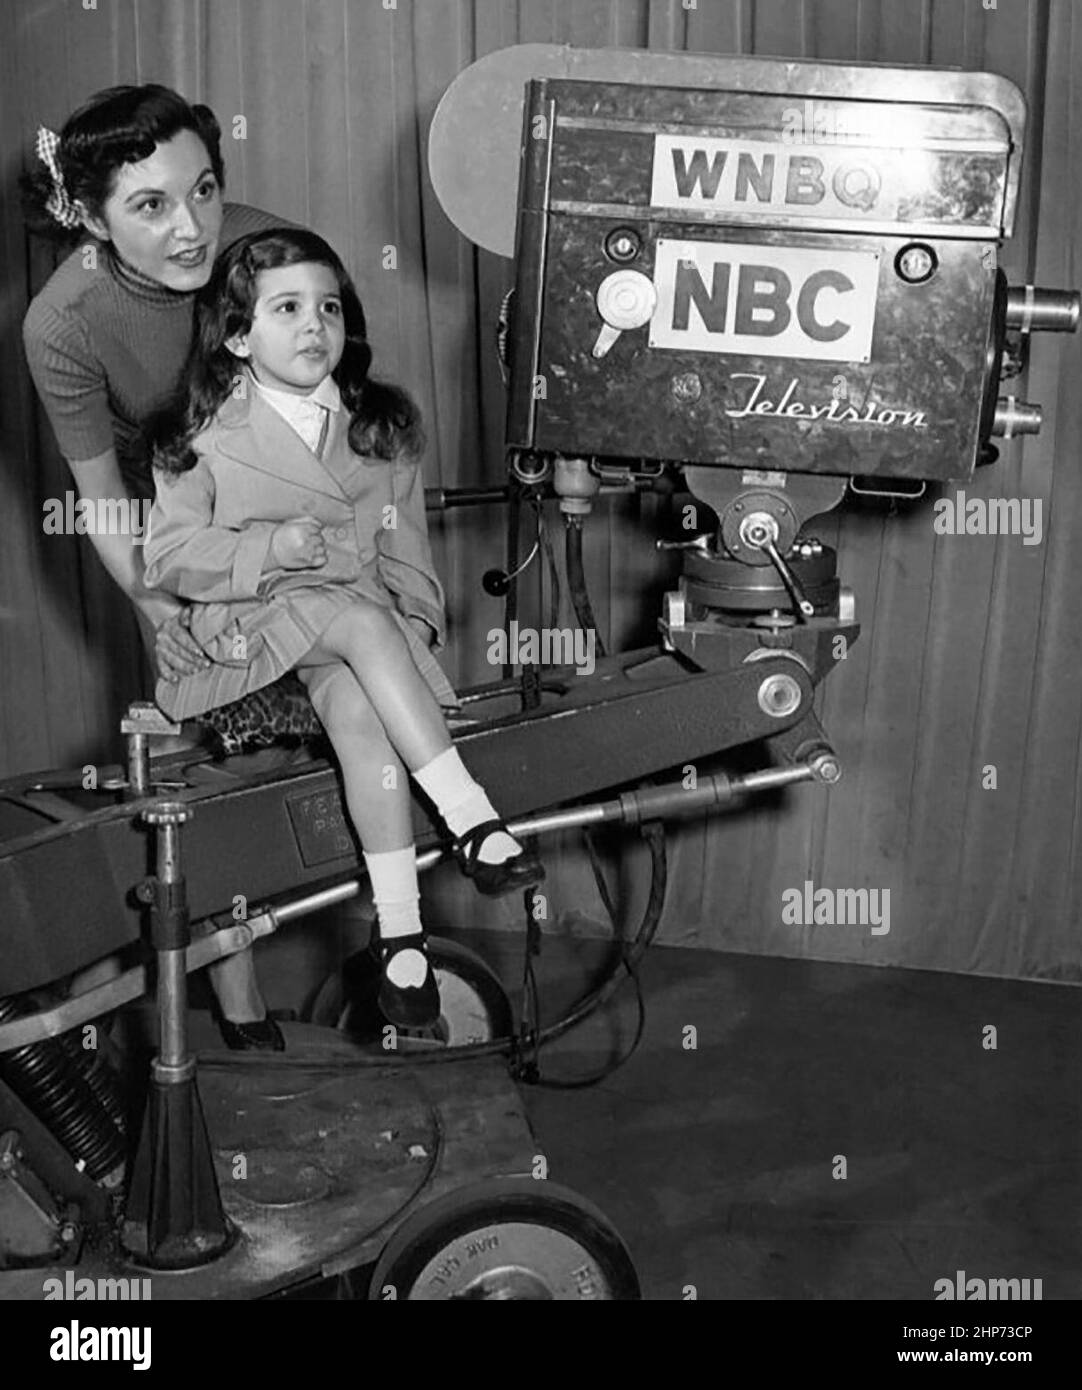 Photo of a television camera used in 1951.  The television station was known as WNBQ at the time, but has been WMAQ-TV (Chicago) for many years. Actress-singer Connie Russell and her daughter, Austine, are pictured. Stock Photo